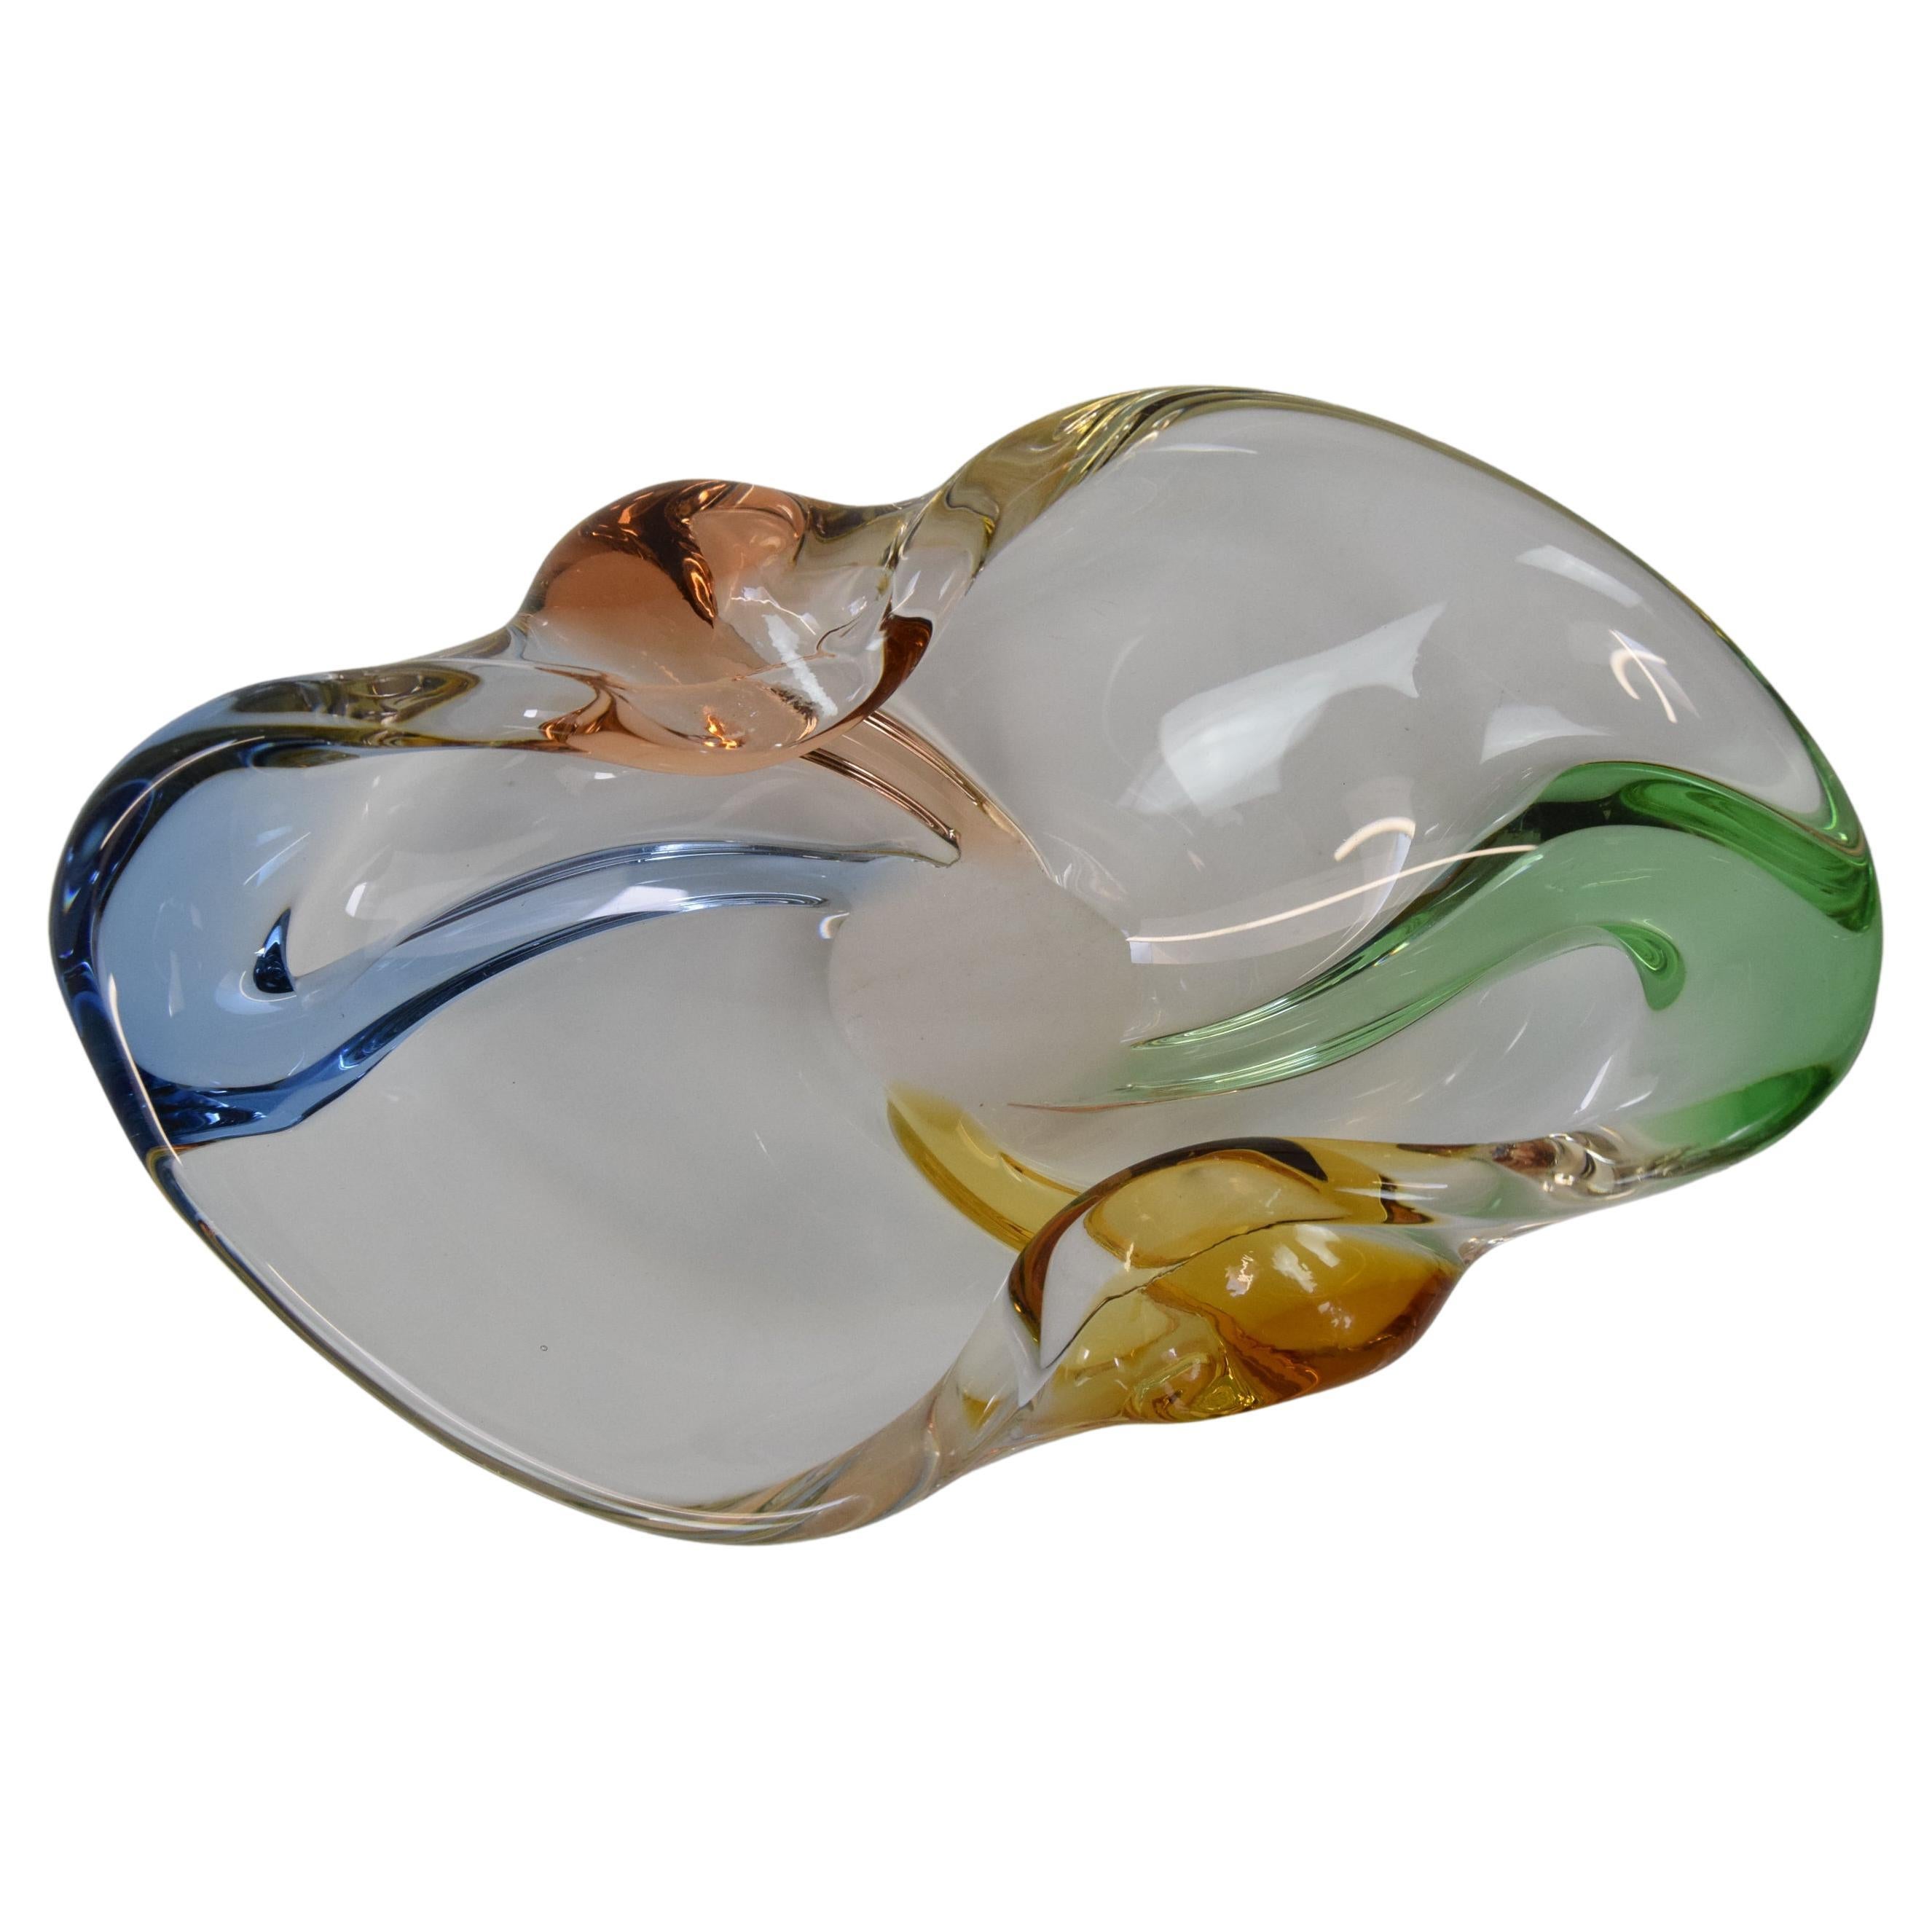 Made in Czechoslovakia
Made of Blown glass
Re-polished
Original condition